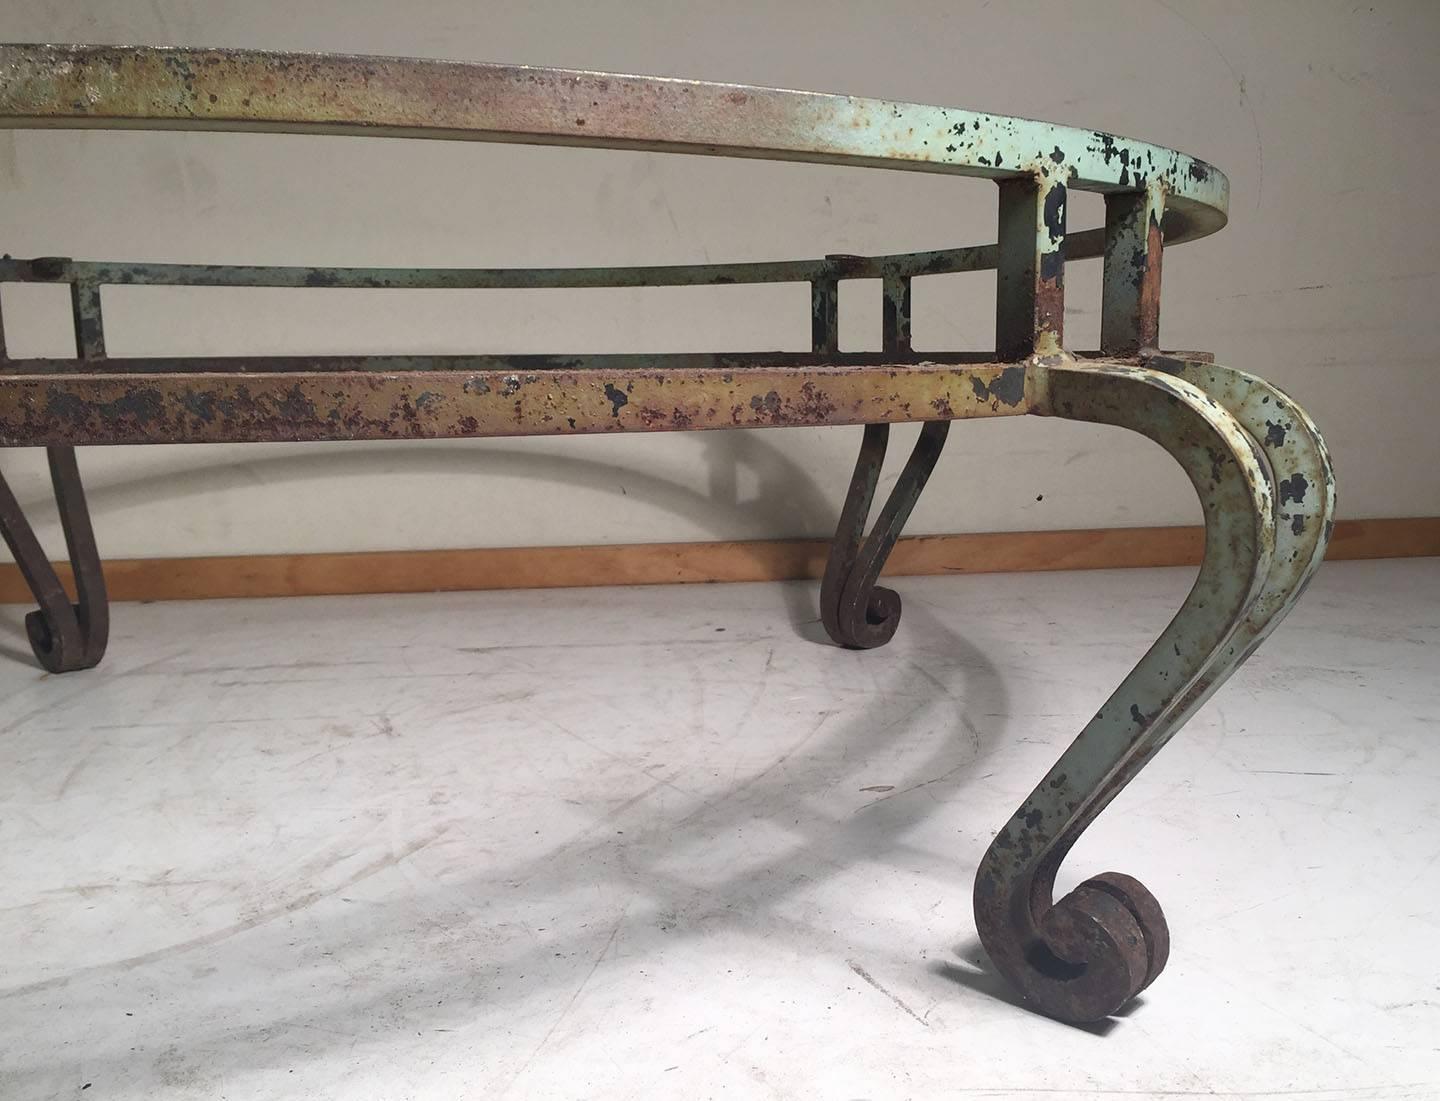 Probably gilded at one time this architectural wrought iron coffee table is great for an outdoor setting, or indoors. Either a fresh coat of paint, or gilding is most likely desired. Though some may prefer the distressed look as it is shown. 

No